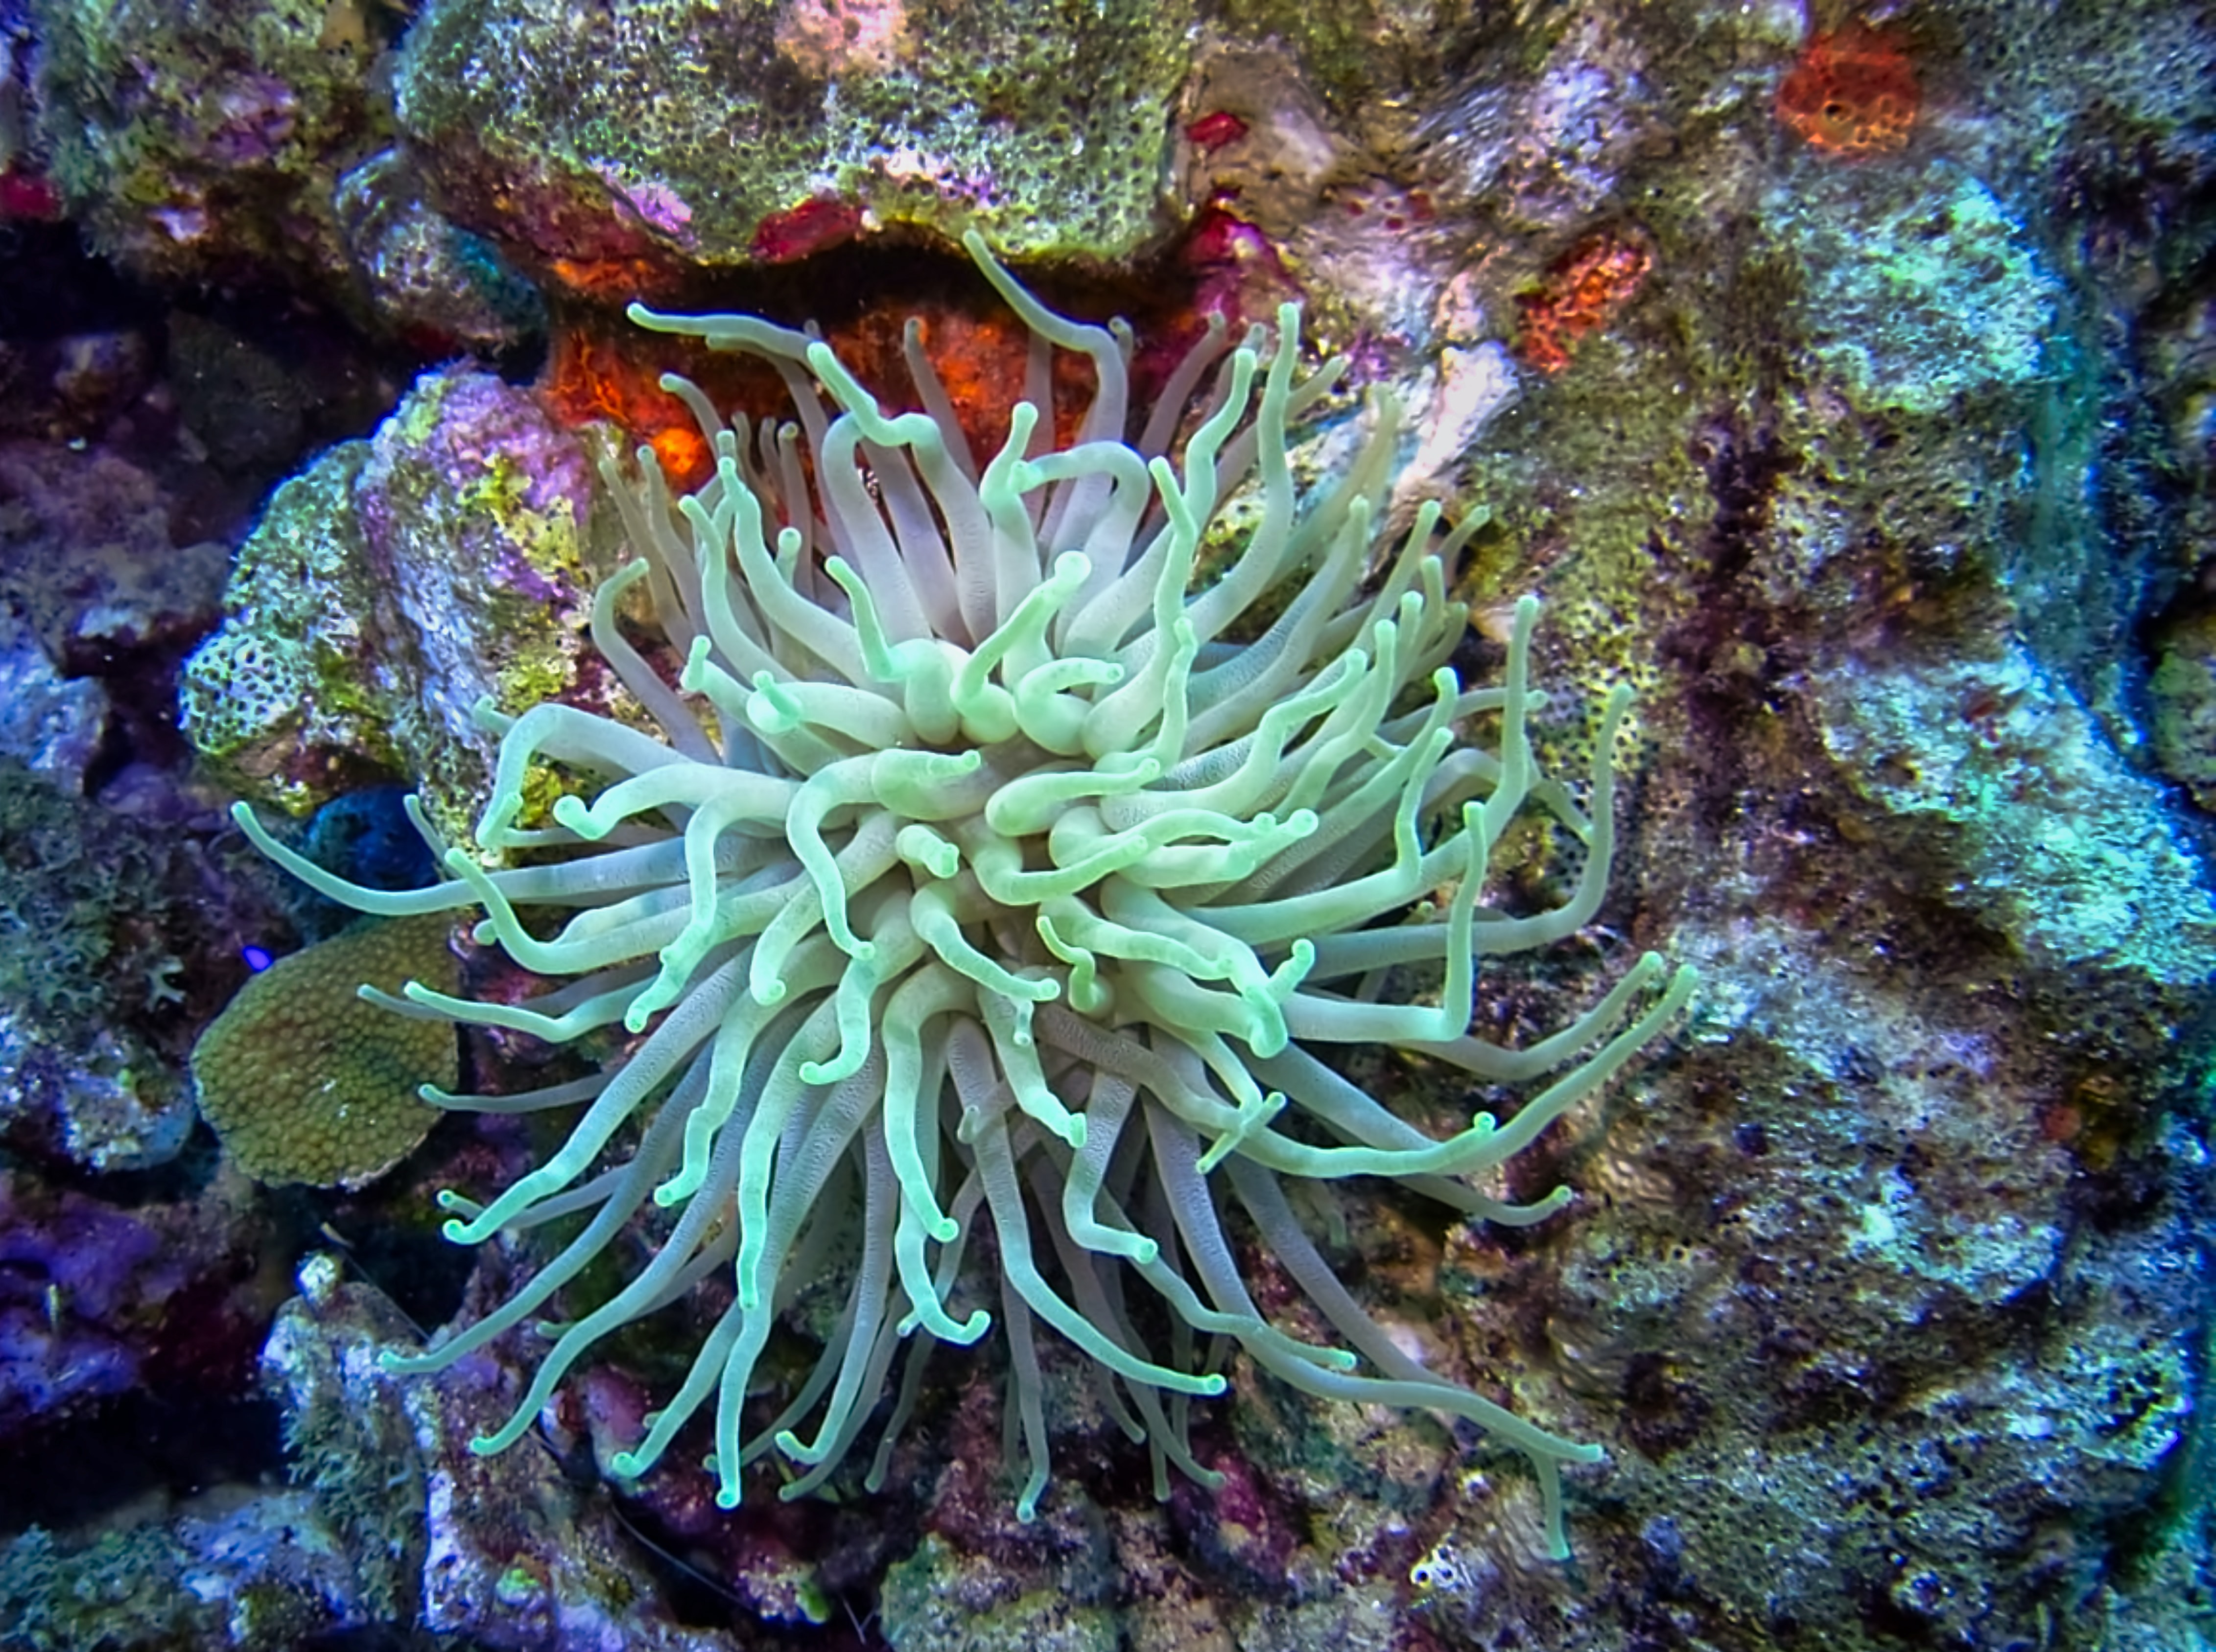 Sea anemone in the Caribbean